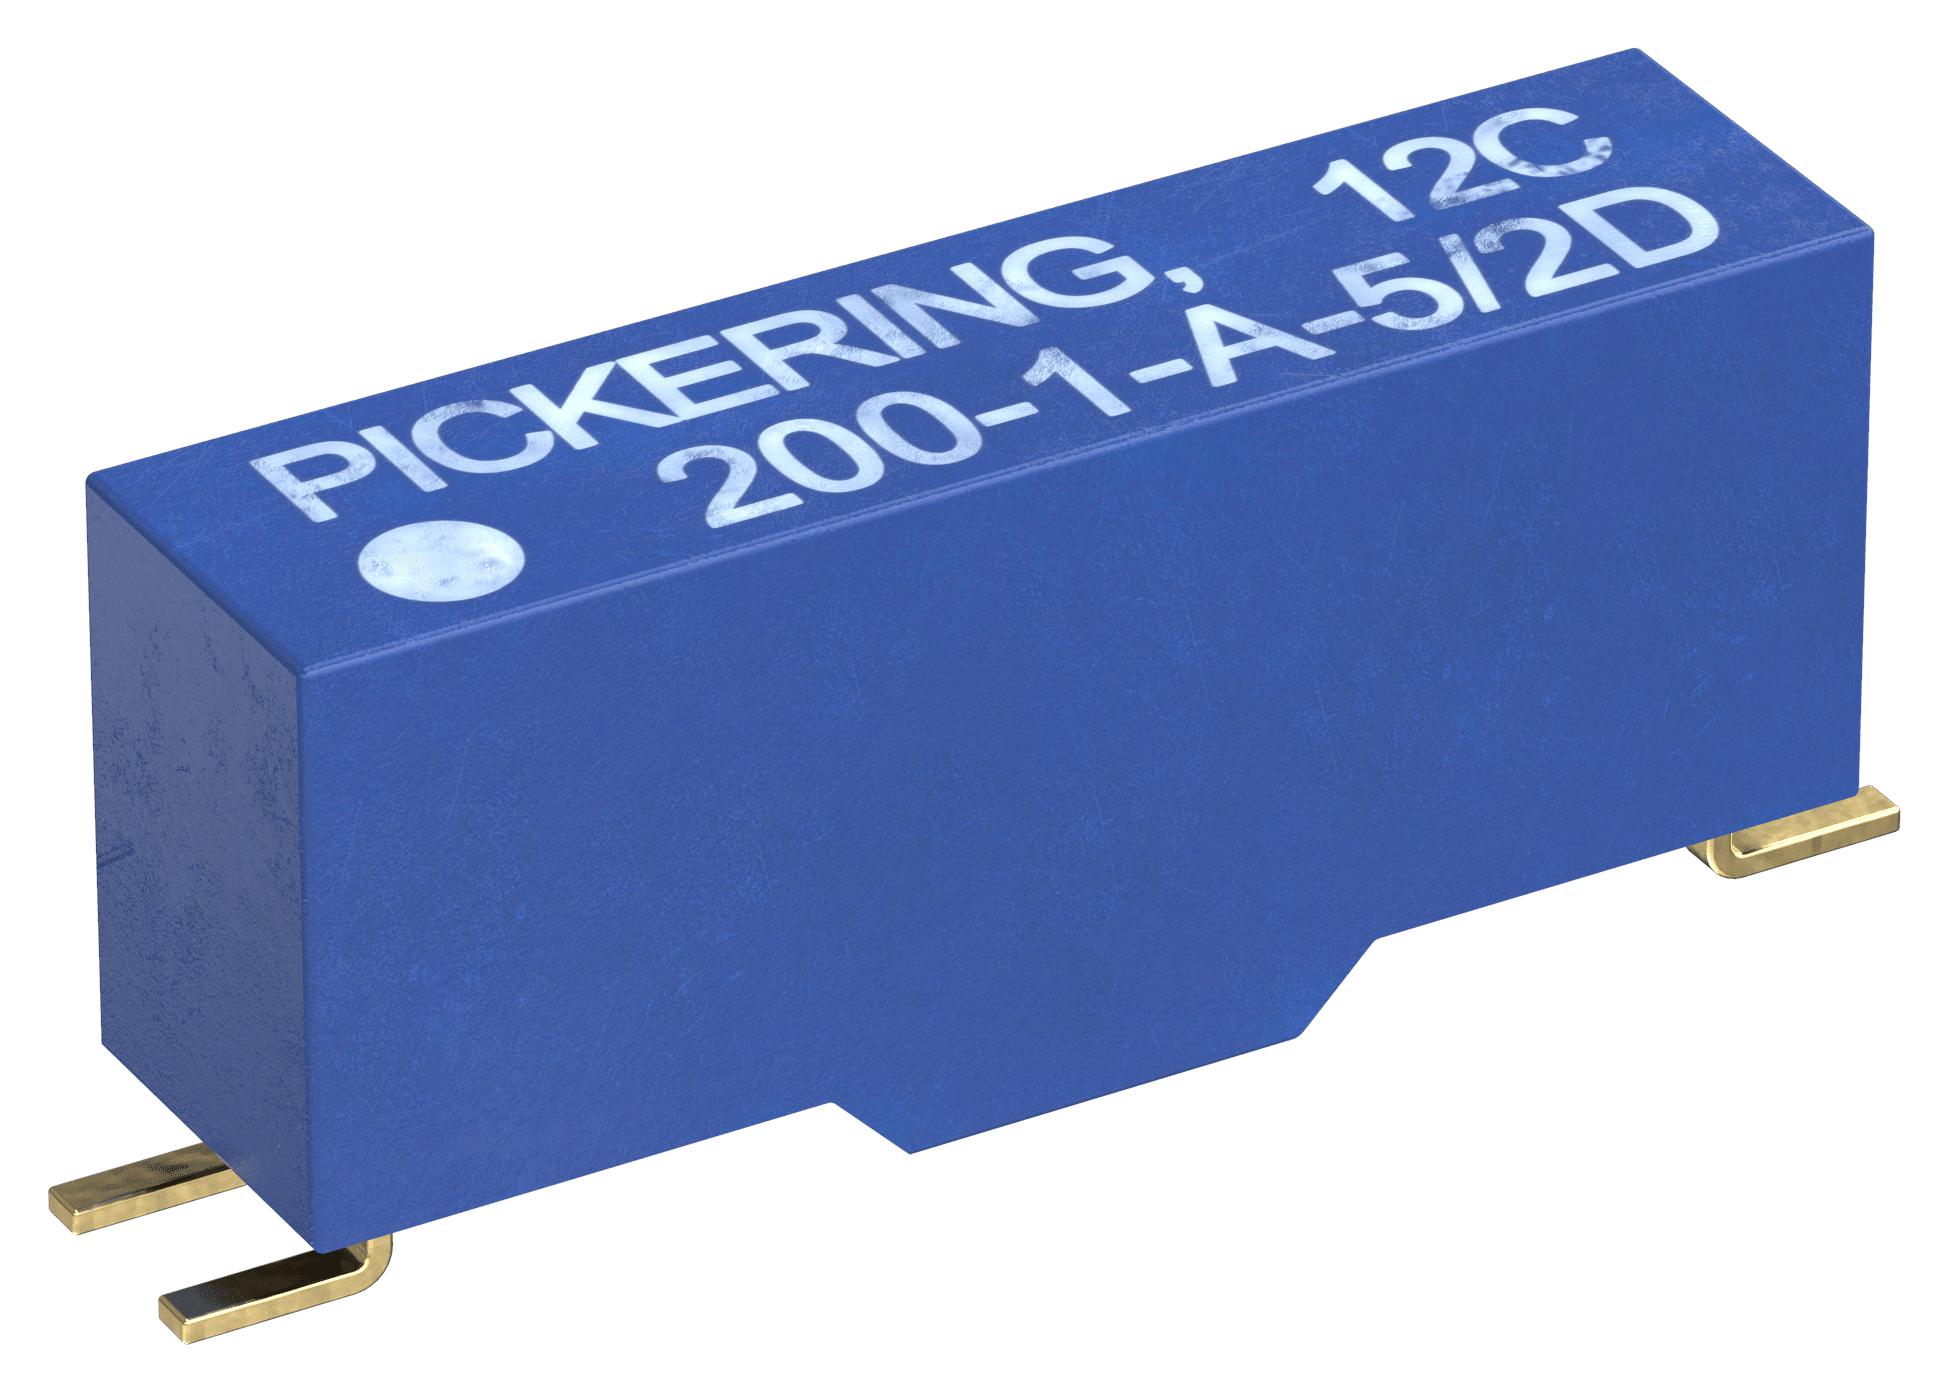 Pickering 200-1-A-5/1D Reed Relay, Spst-No, 5V, Smd